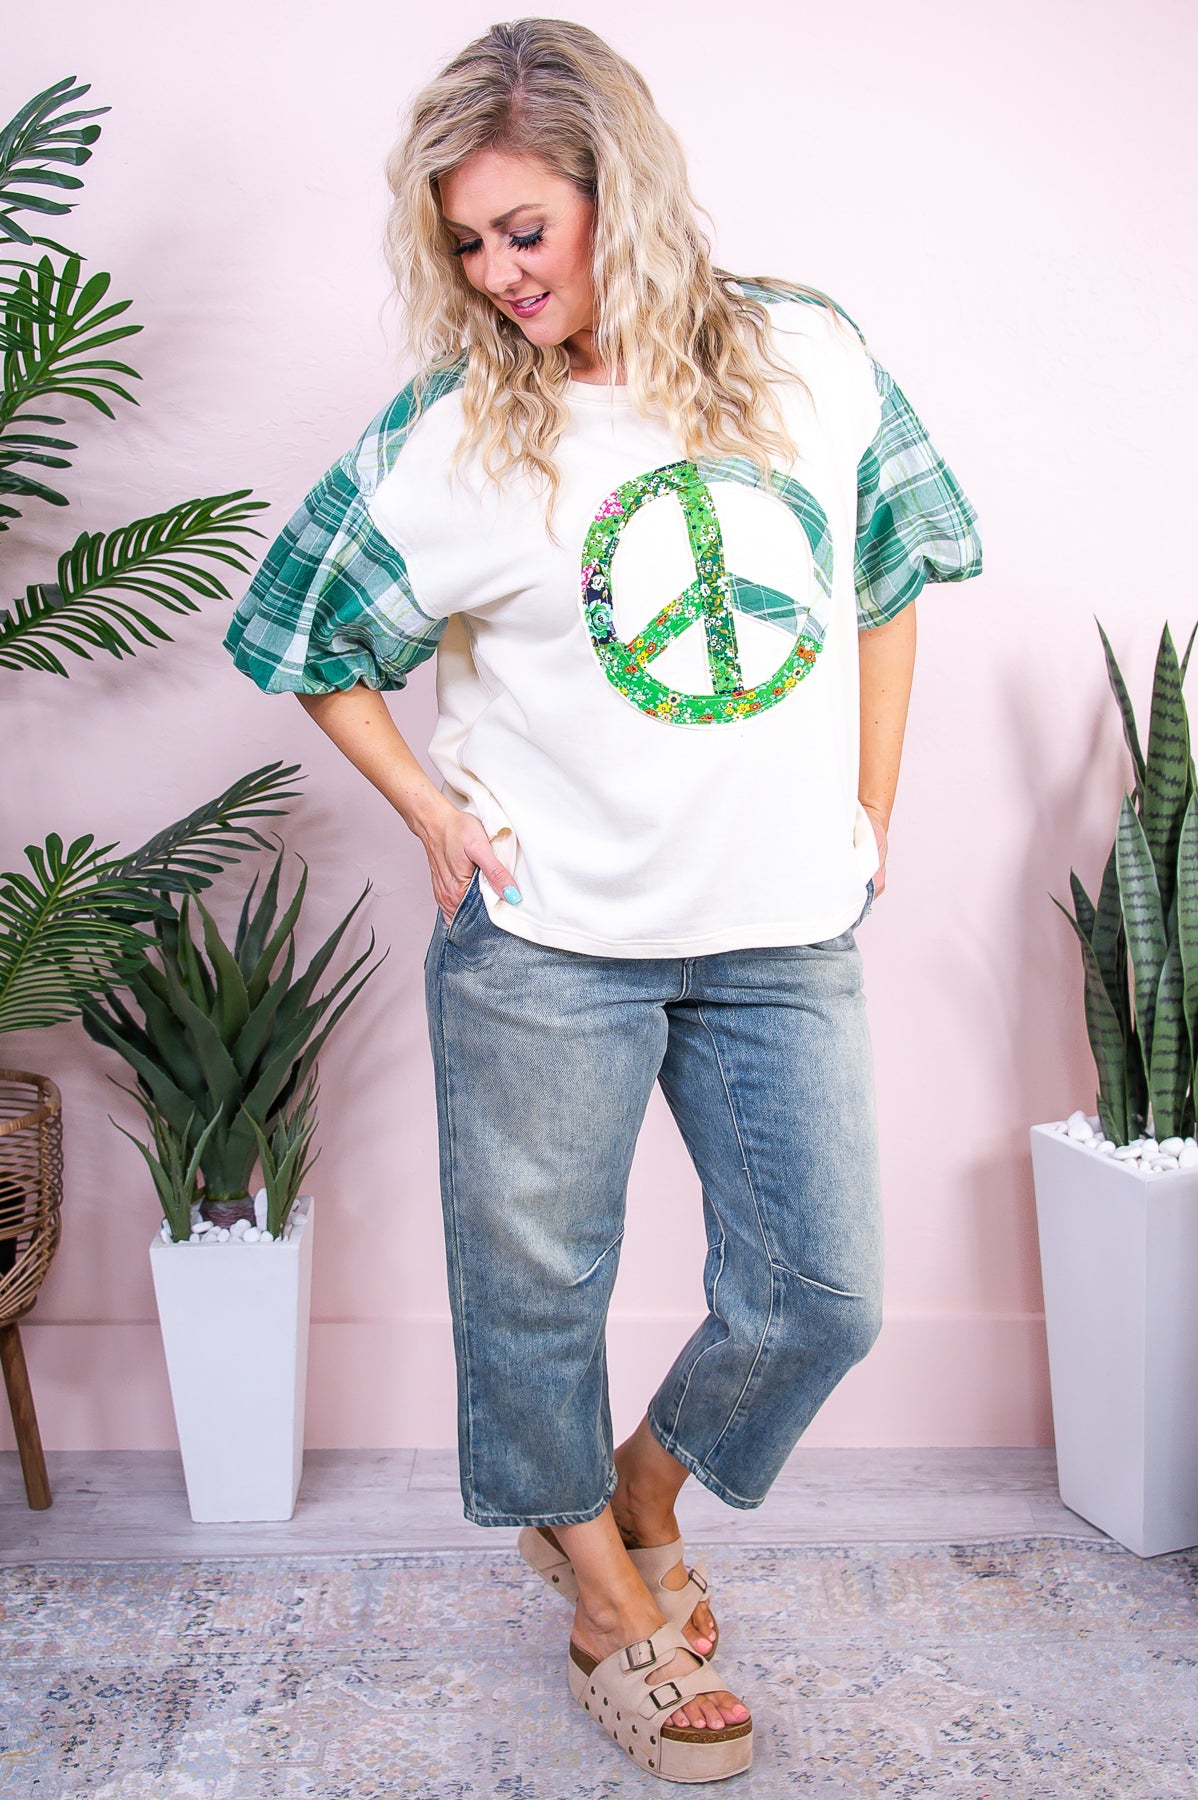 It's Cool To Be Kind Green/Multi Color Floral Peace Sign/Plaid Top - T9563GN